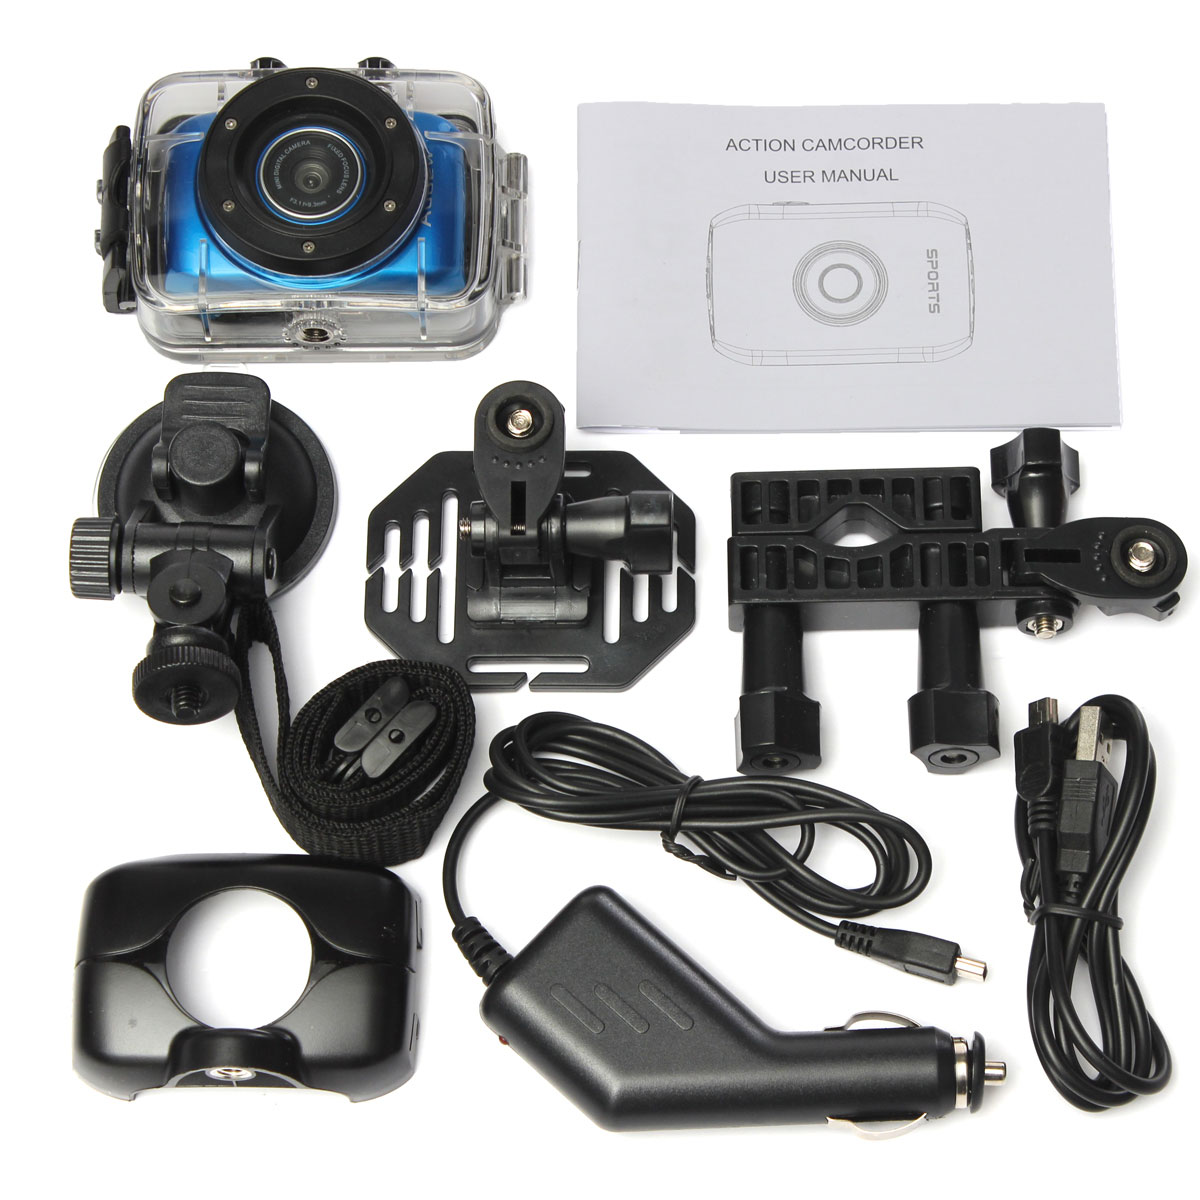 2-Inch-720P-HD-Touch-Screen-Portable-Waterproof-Mini-Action-Outdoor-Sport-Camera-DV-Camcorder-1336787